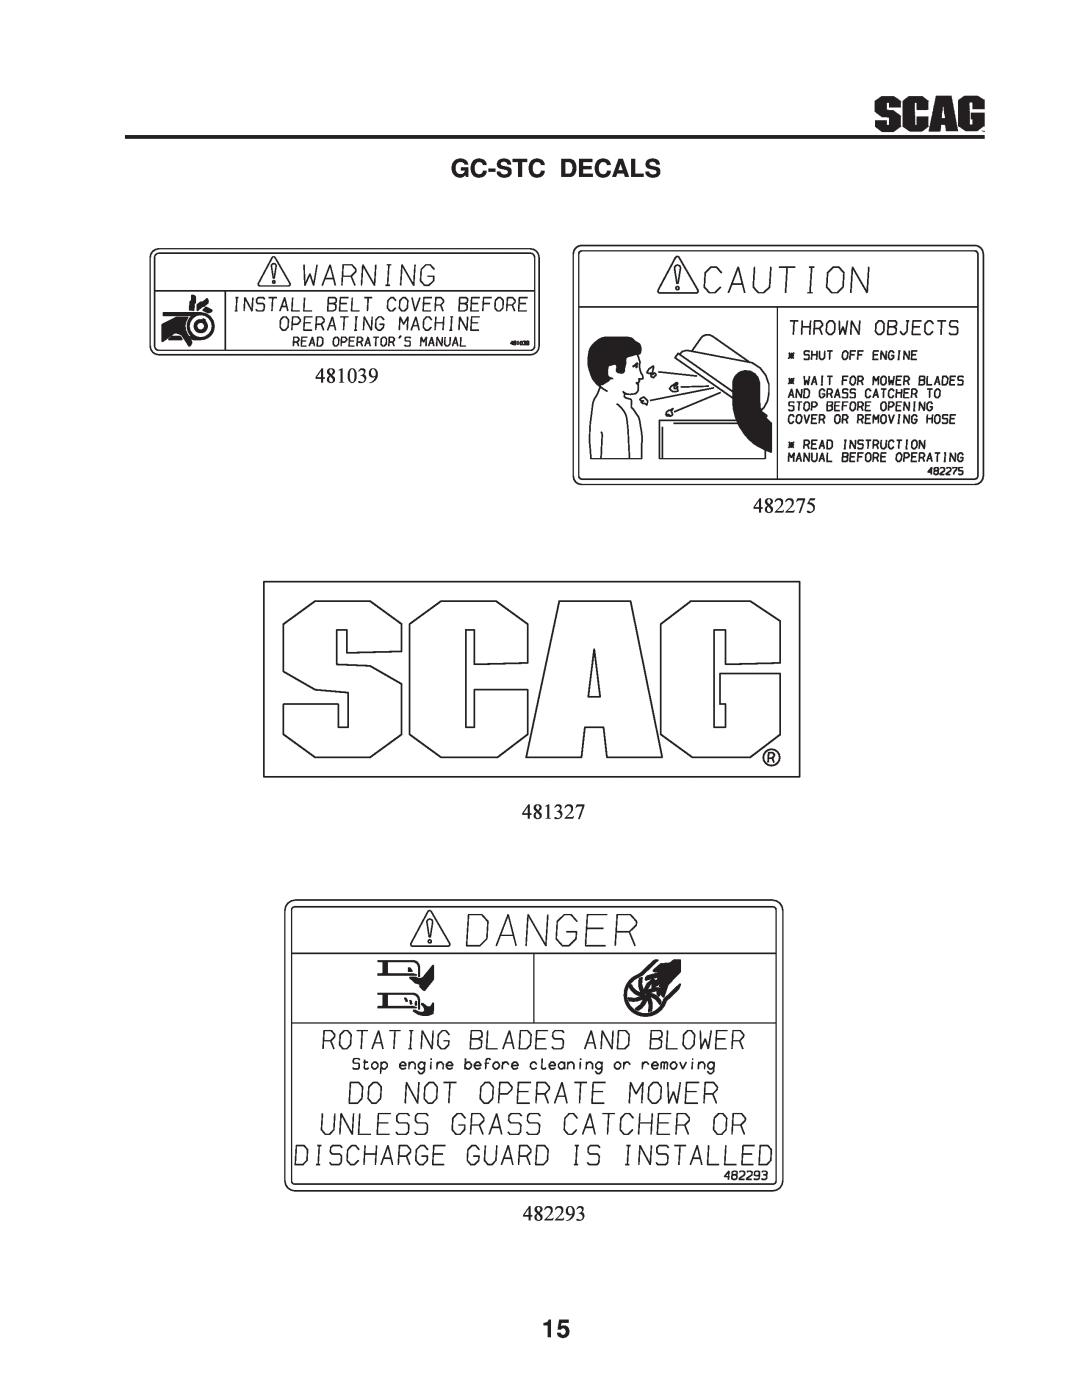 Scag Power Equipment GC-STC manual Gc-Stc Decals 